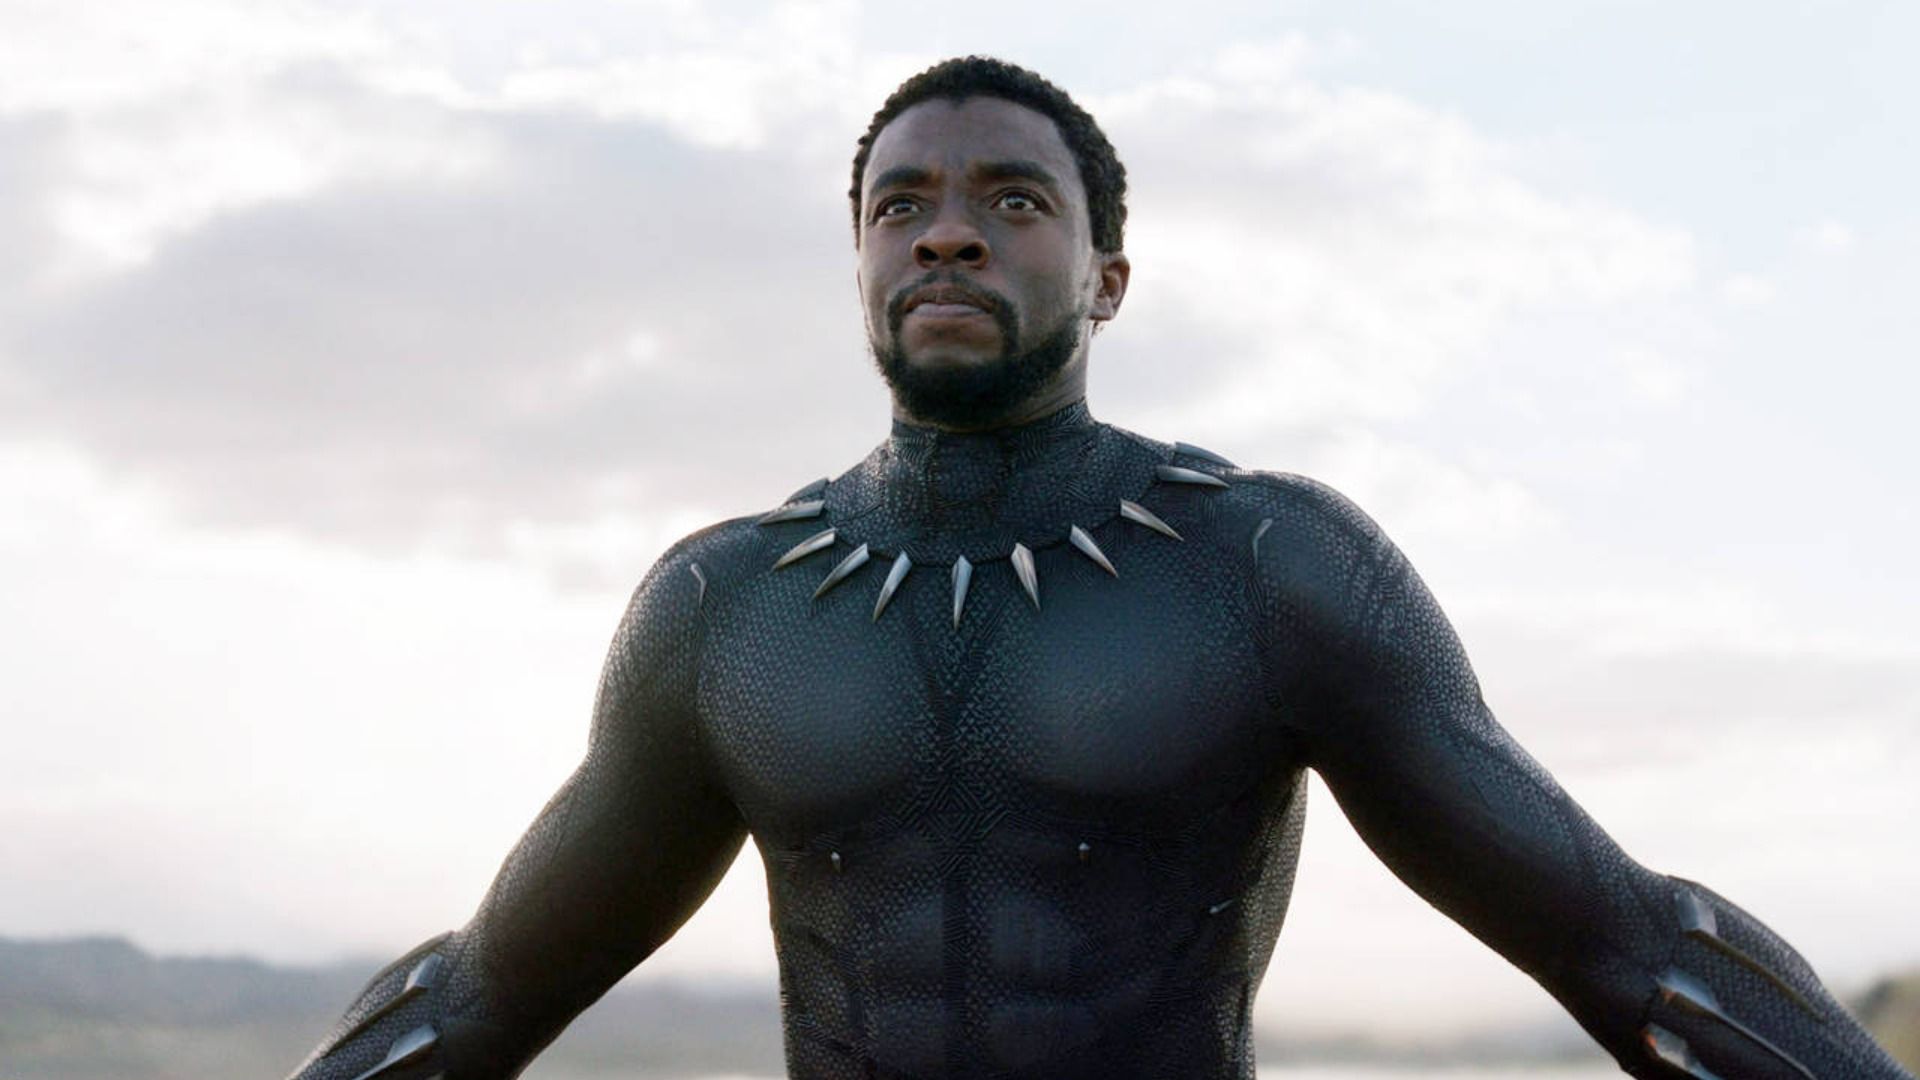 Avengers actors lead tributes to Black Panther star Chadwick Boseman, who has died aged 43